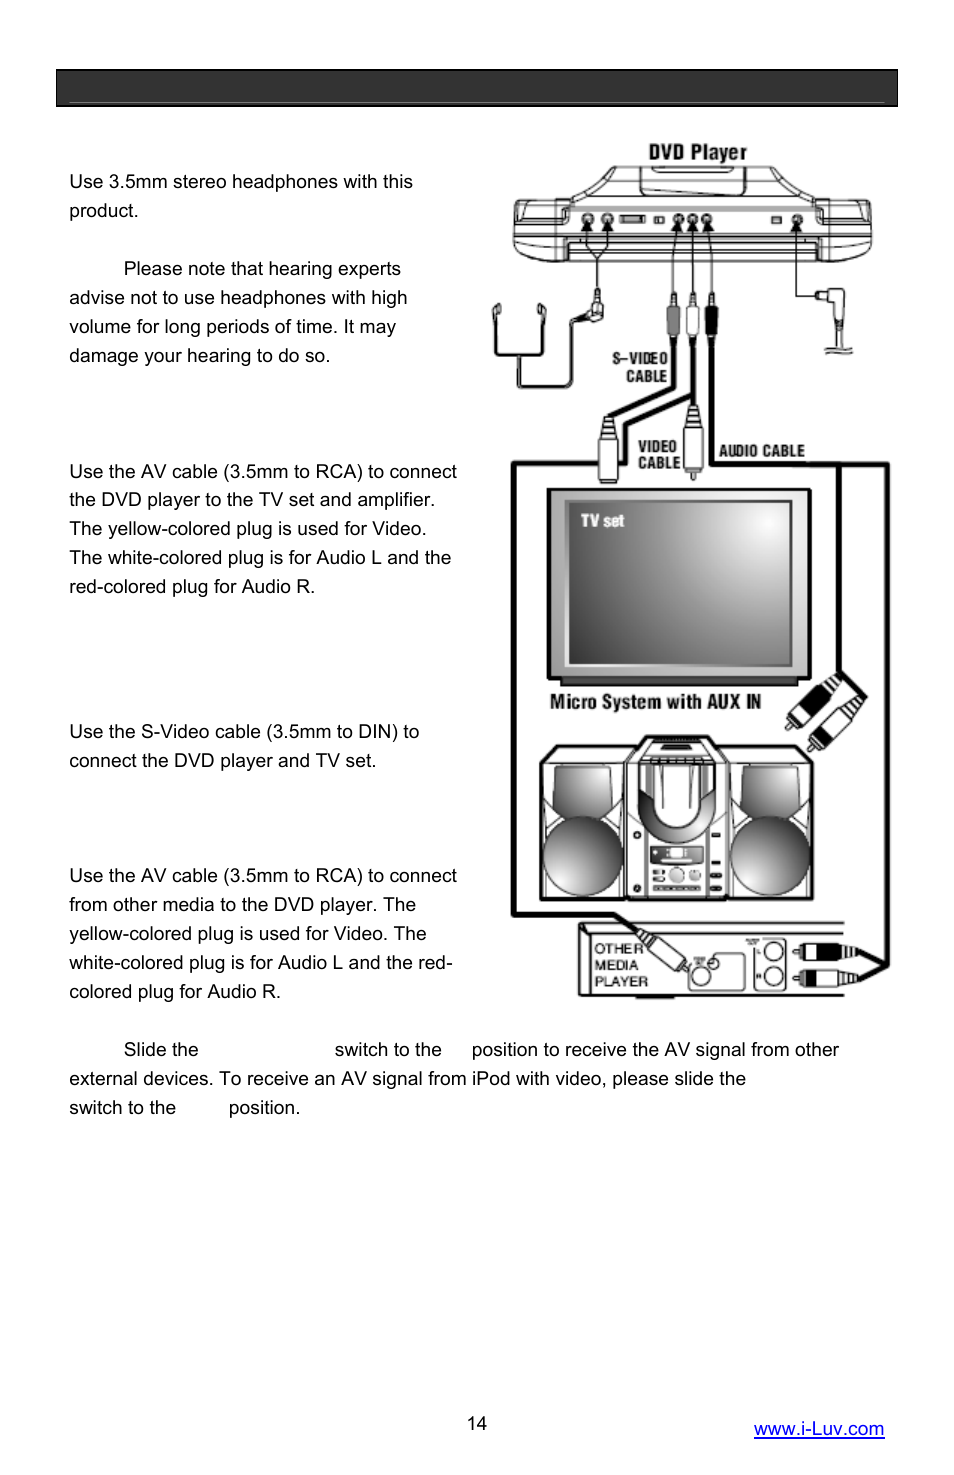 Getting started, Connecting headphones, Connecting the dvd players to a tv set by av cable | Connecting other media to the dvd player | Iluv i1055 User Manual | Page 15 / 36